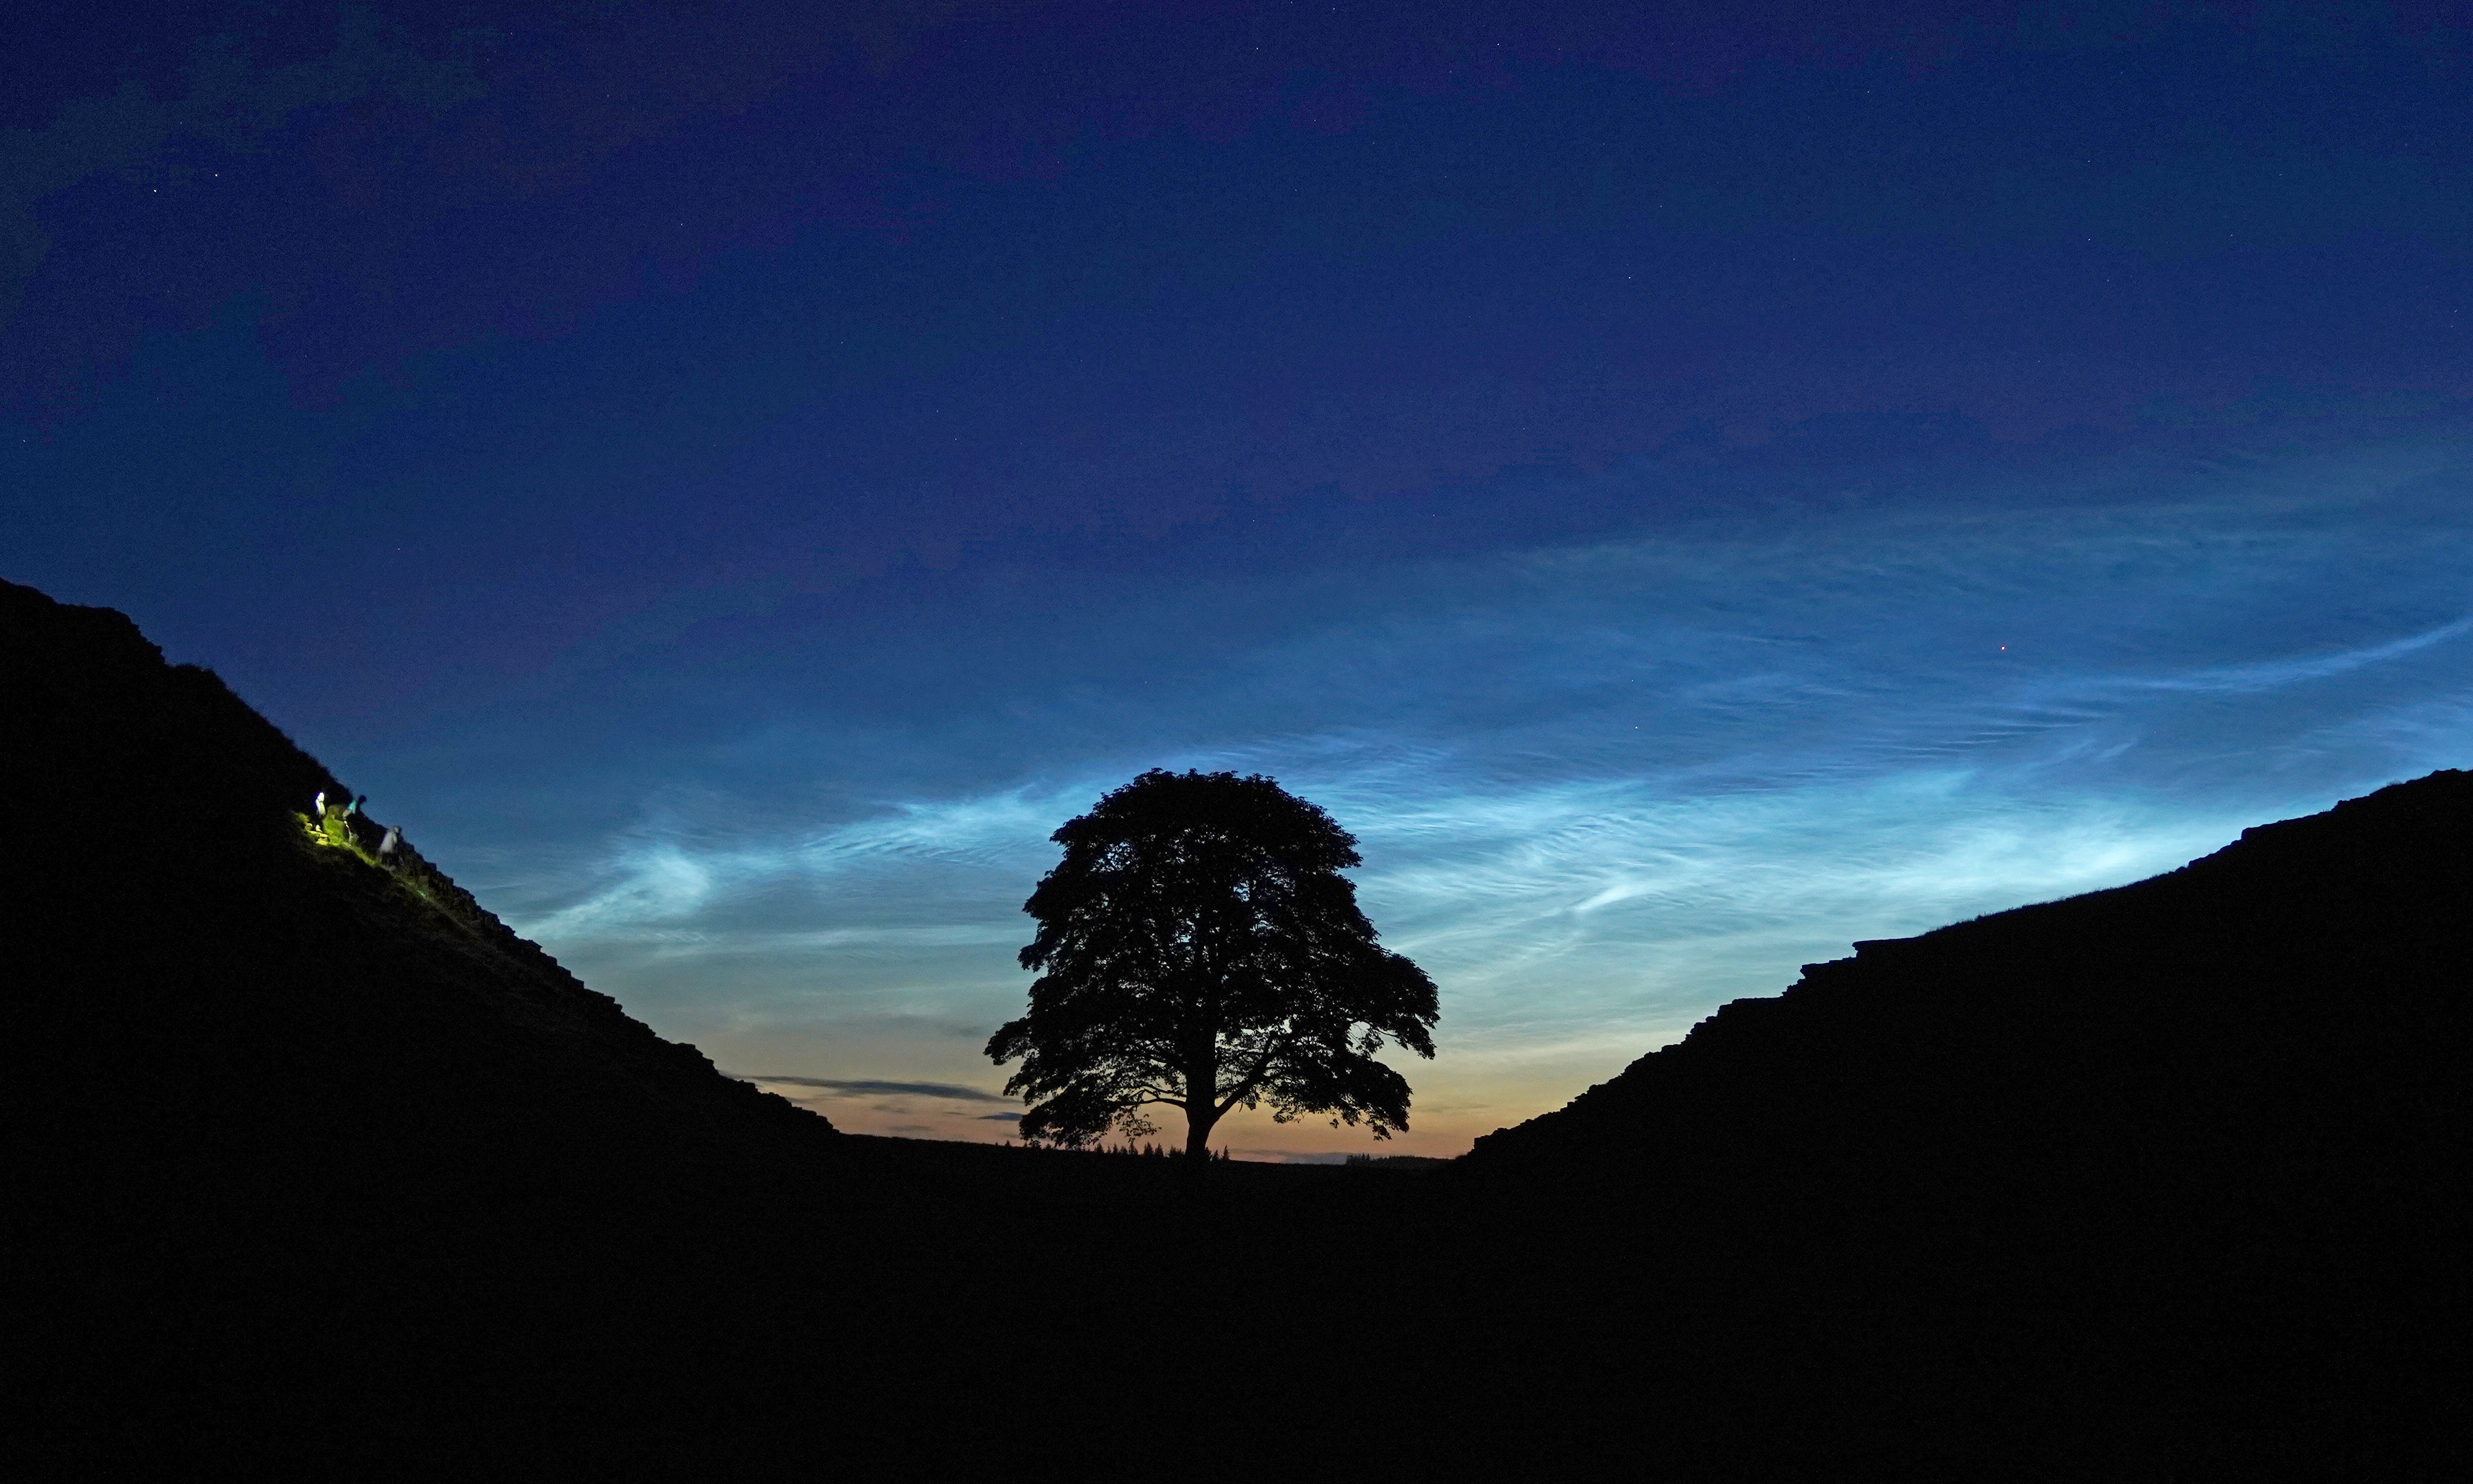 Rare noctilucent clouds appear over the tree on Hadrian's Wall in Northumberland